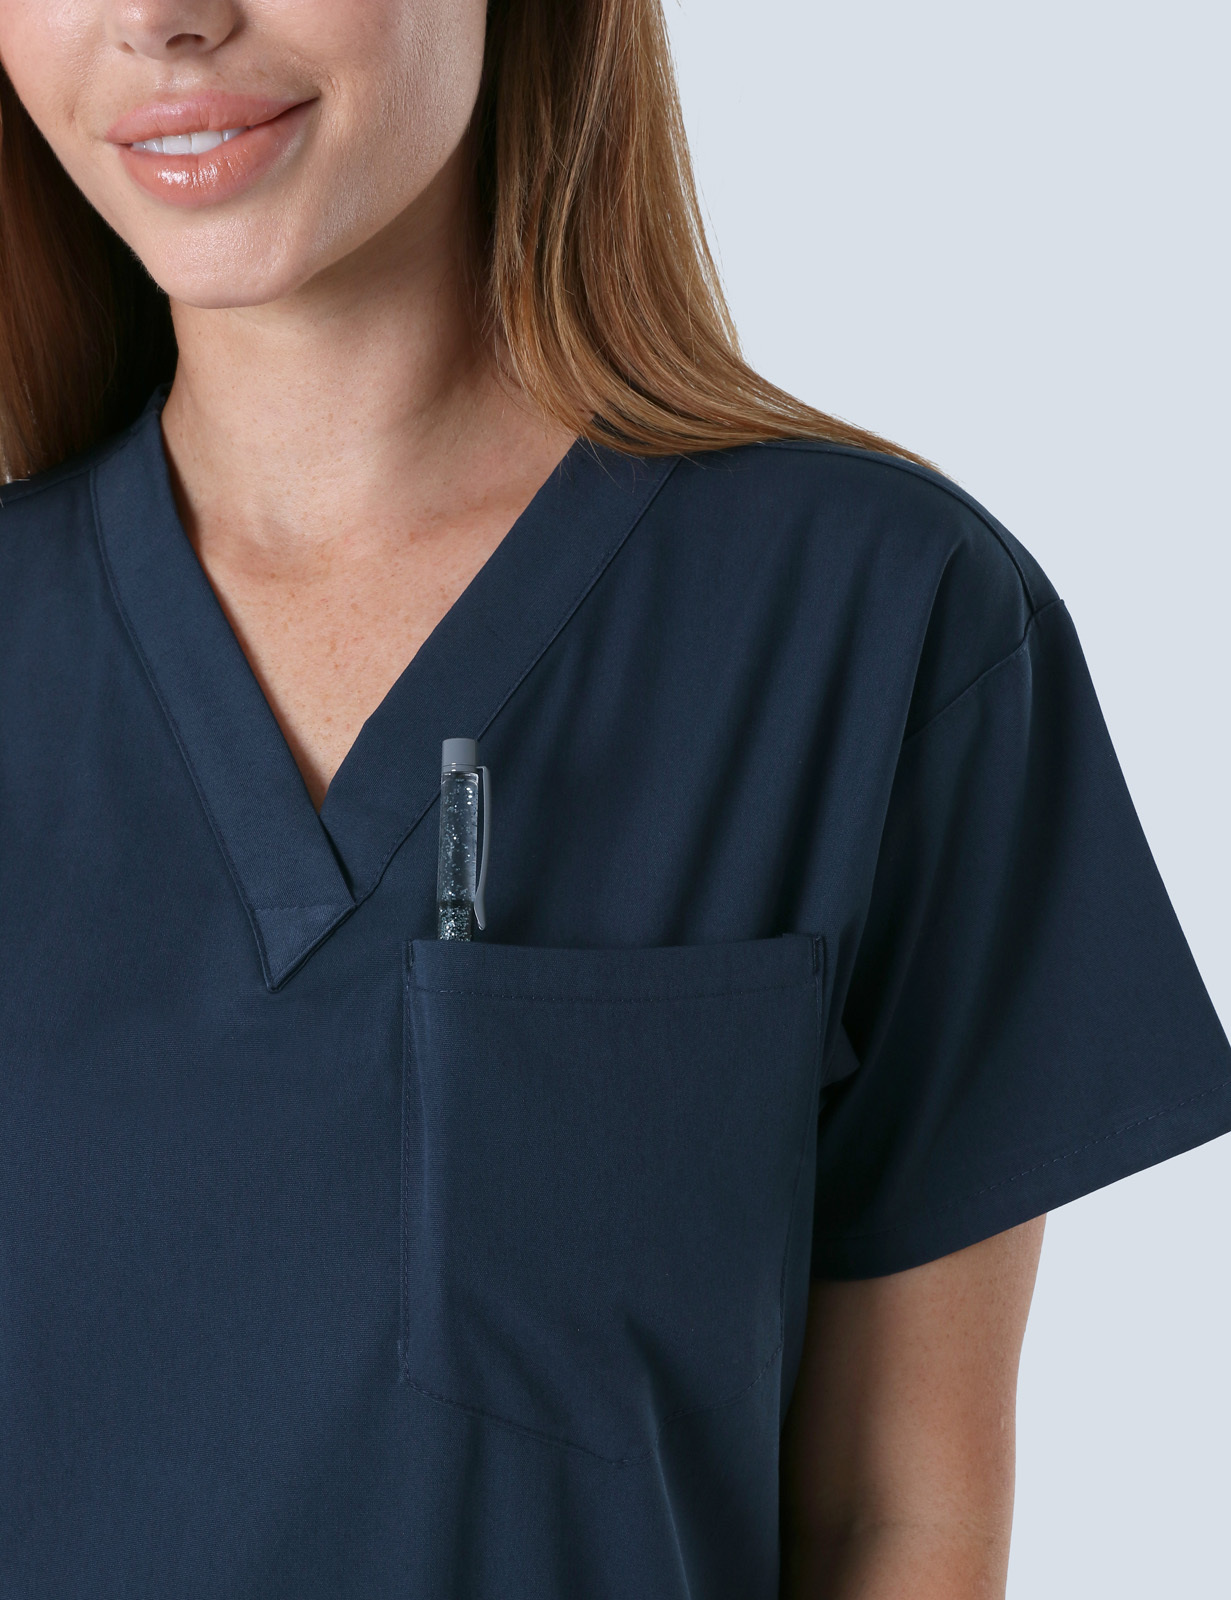 Taalk Skin Clinic (4 Pocket Scrub Top and Cargo Pants in Navy incl Logos)